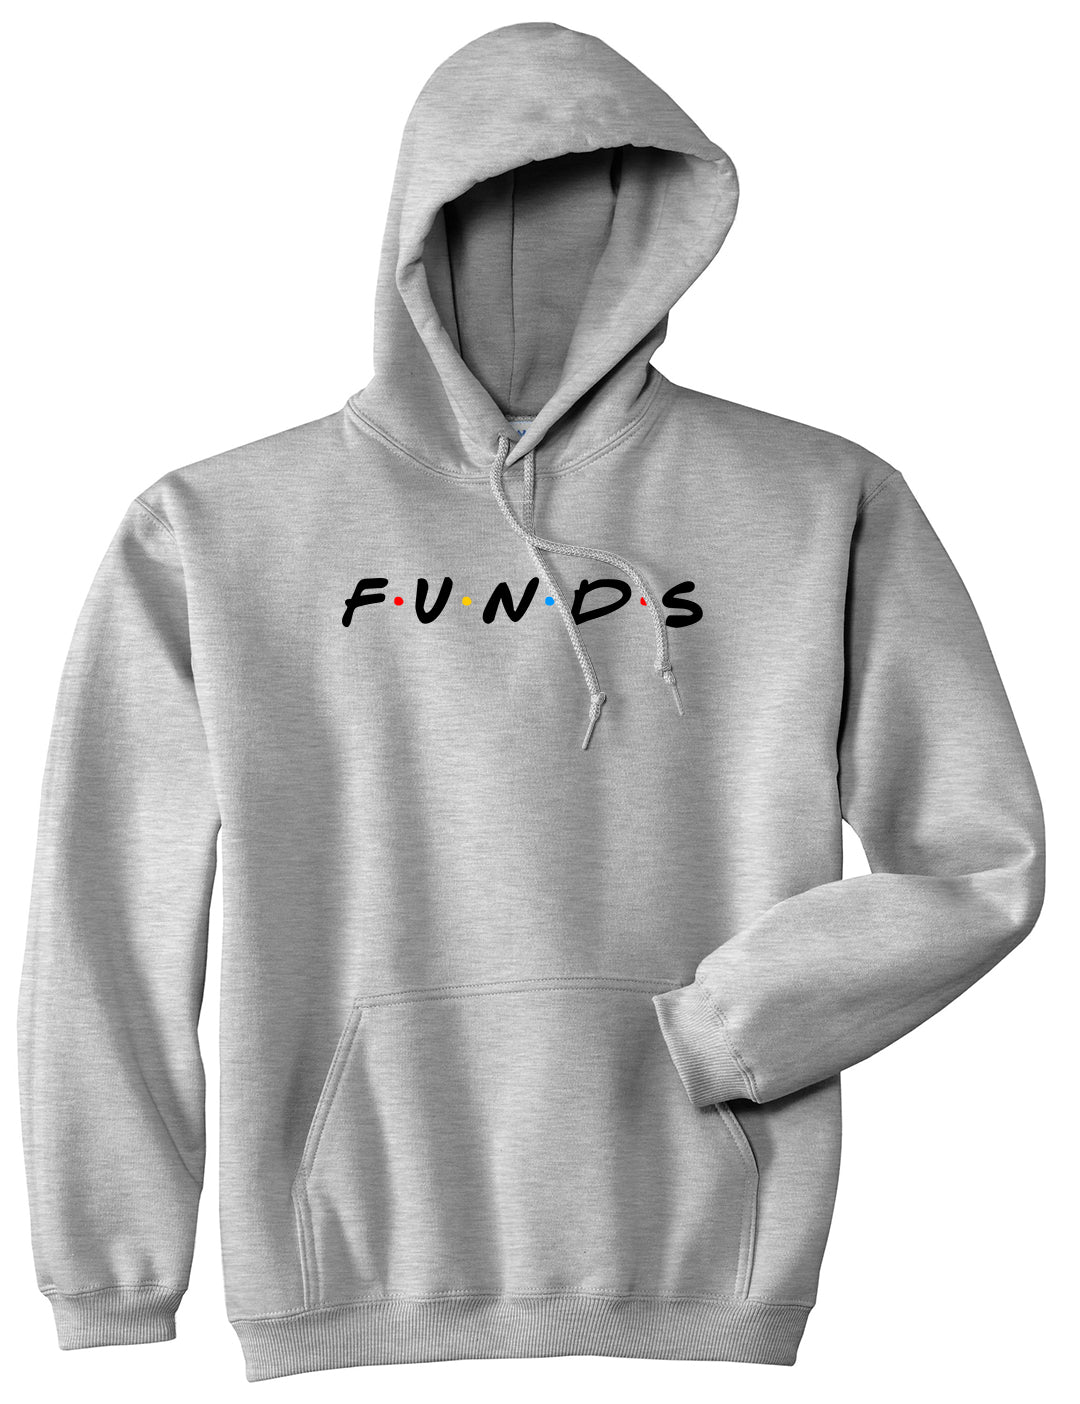 Funds Friends Mens Pullover Hoodie Grey